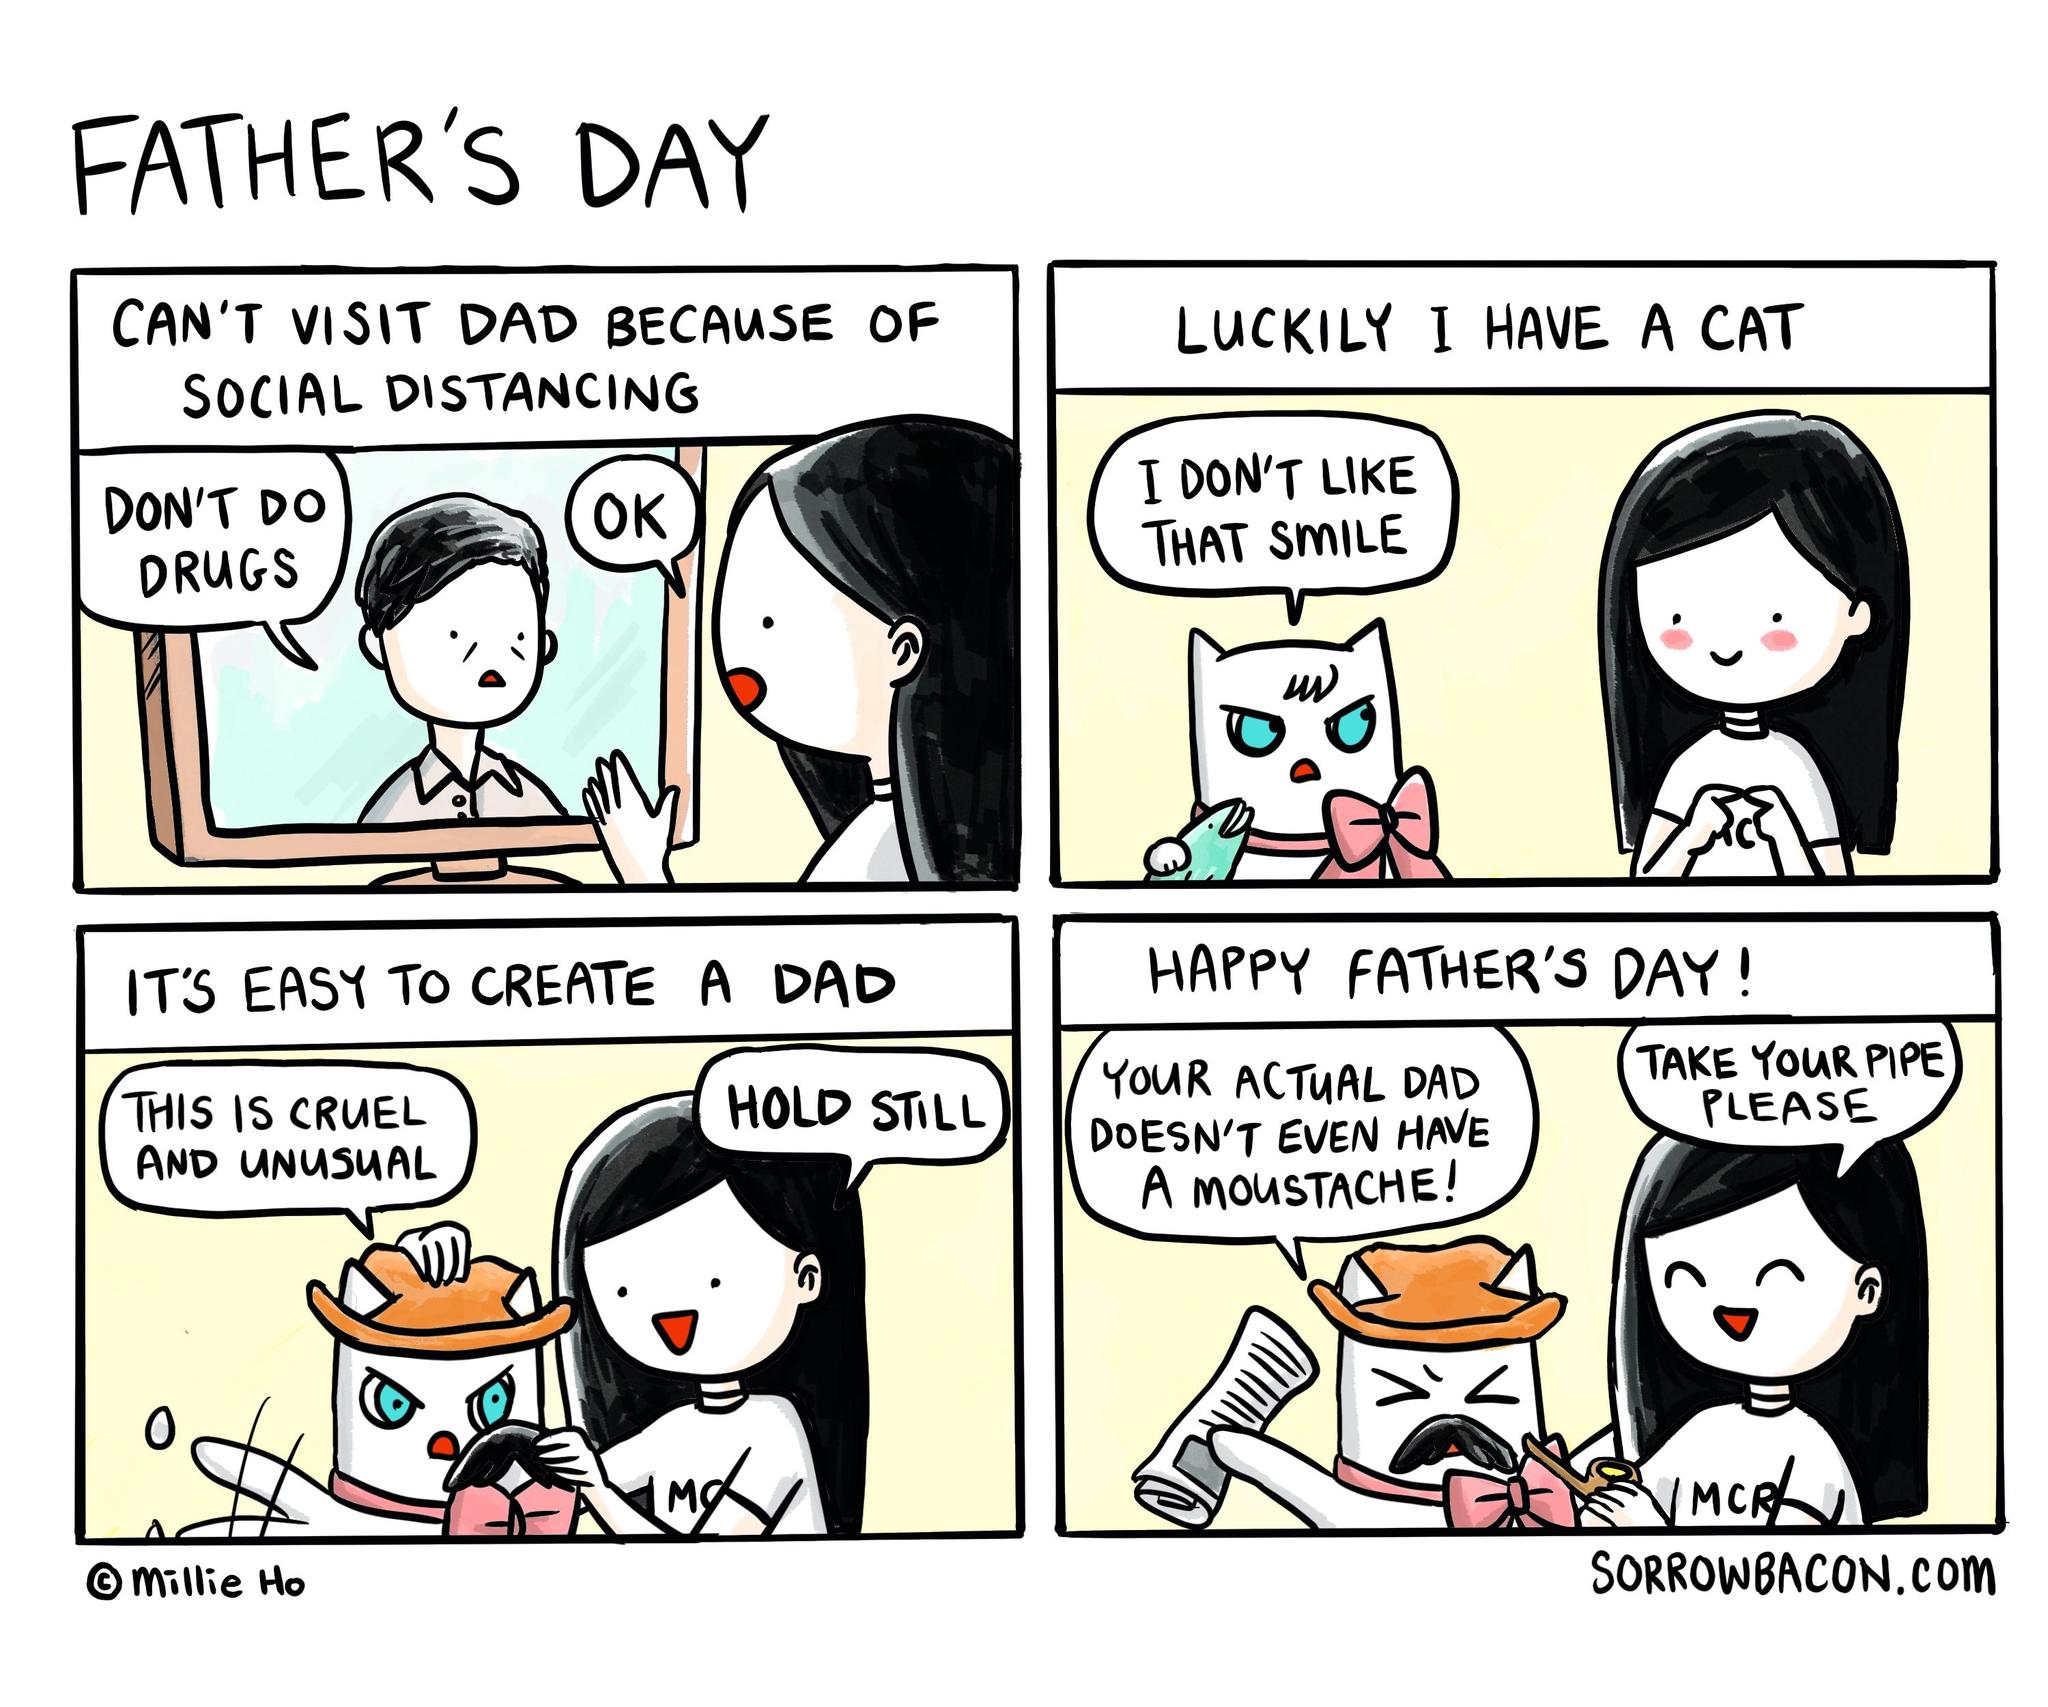 Father's Day sorrowbacon comic